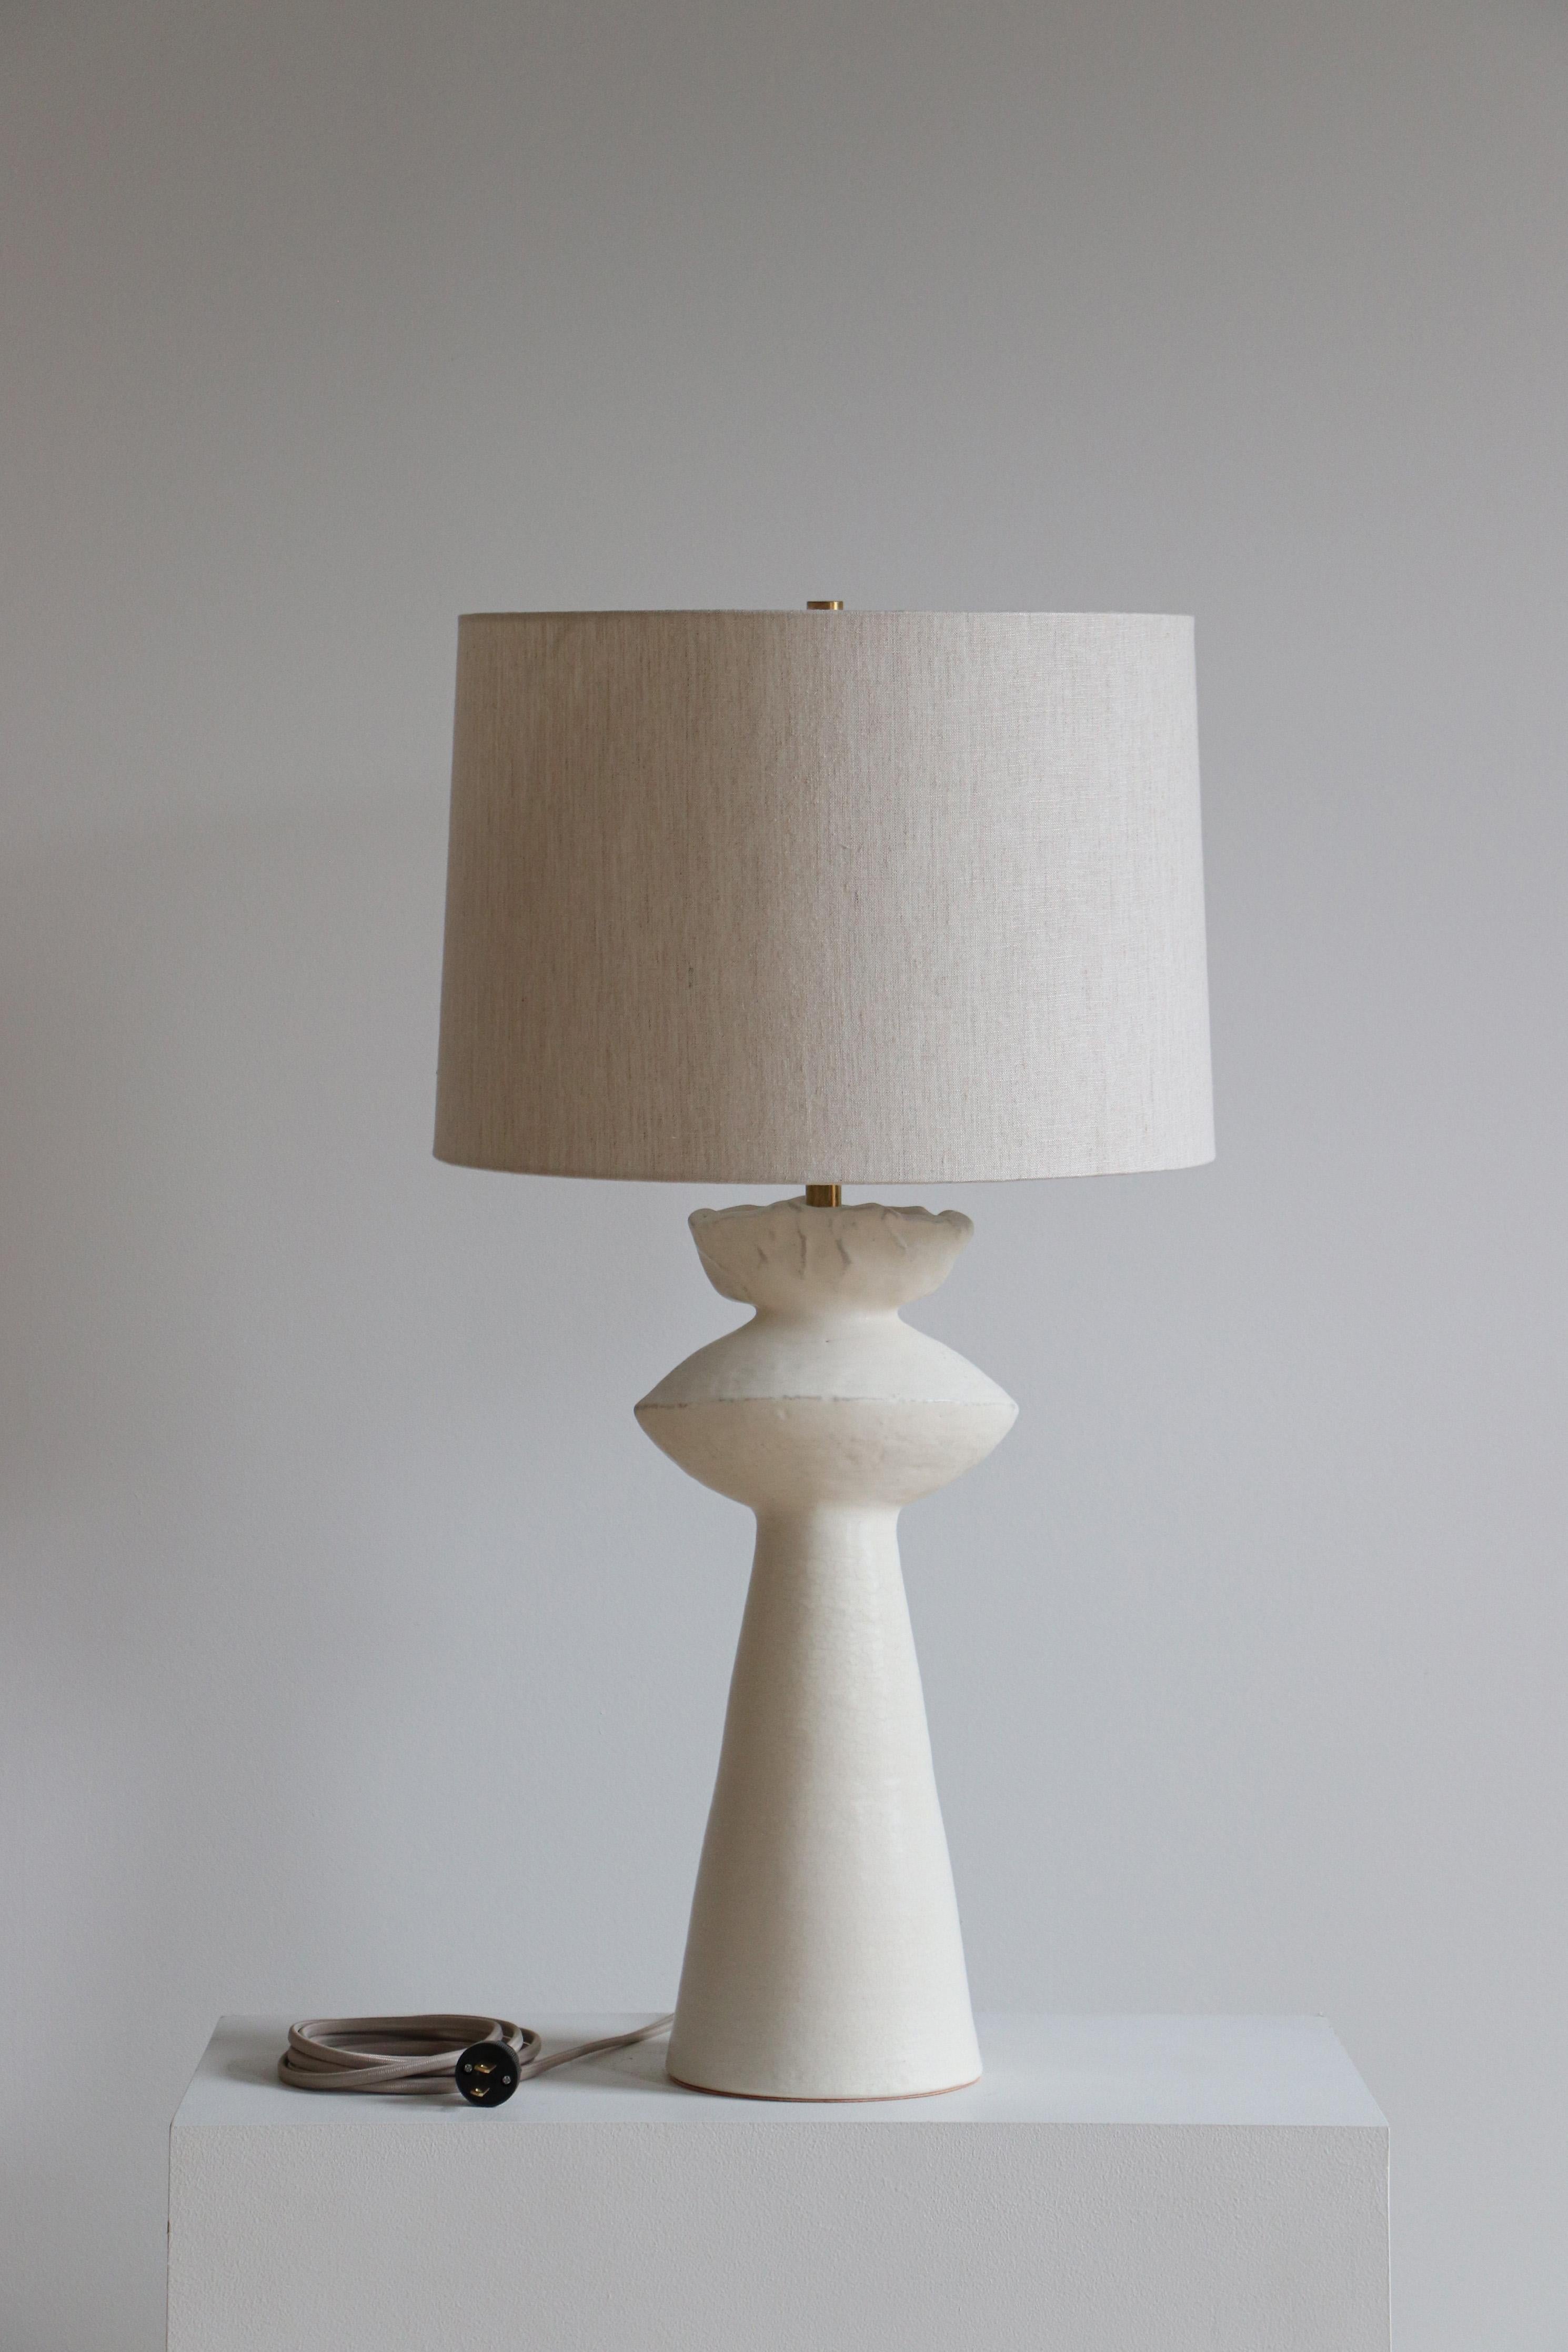 Stone Cicero 30 Table Lamp by Danny Kaplan Studio
Dimensions: ⌀ 41 x H 76 cm
Materials: Glazed Ceramic, Unfinished Brass, Linen

This item is handmade, and may exhibit variability within the same piece. We do our best to maintain a consistent